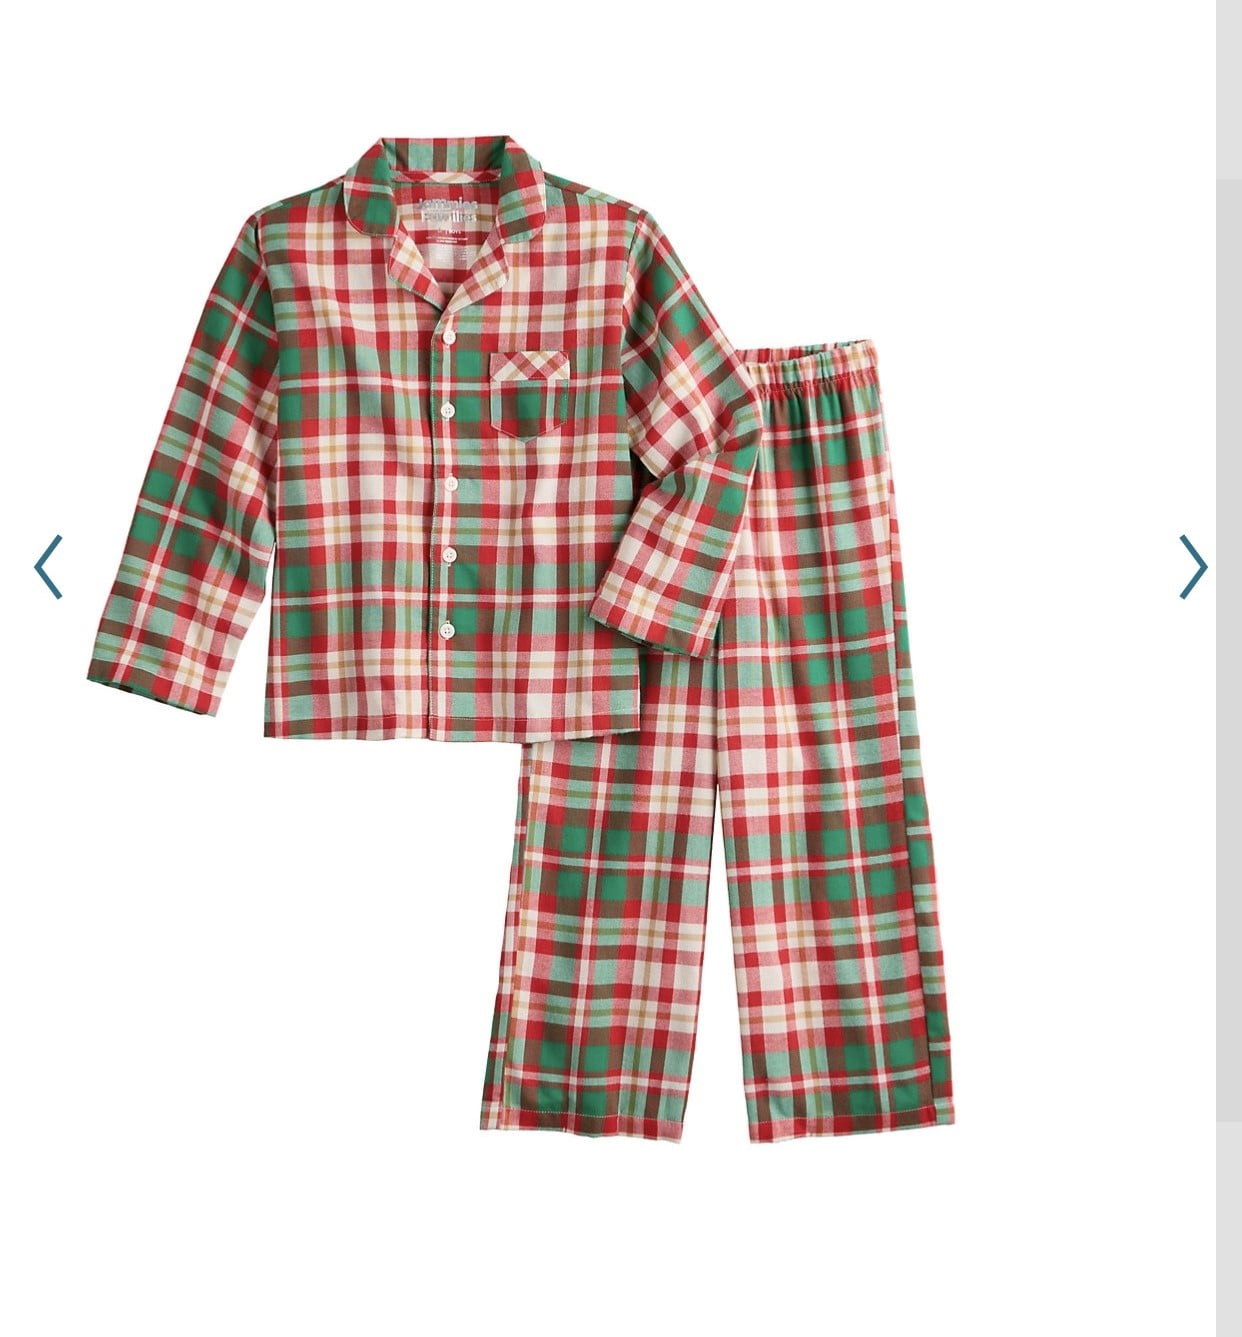 Jammies for your Families Boys Green and Red Plaid Pajamas - Walmart.com